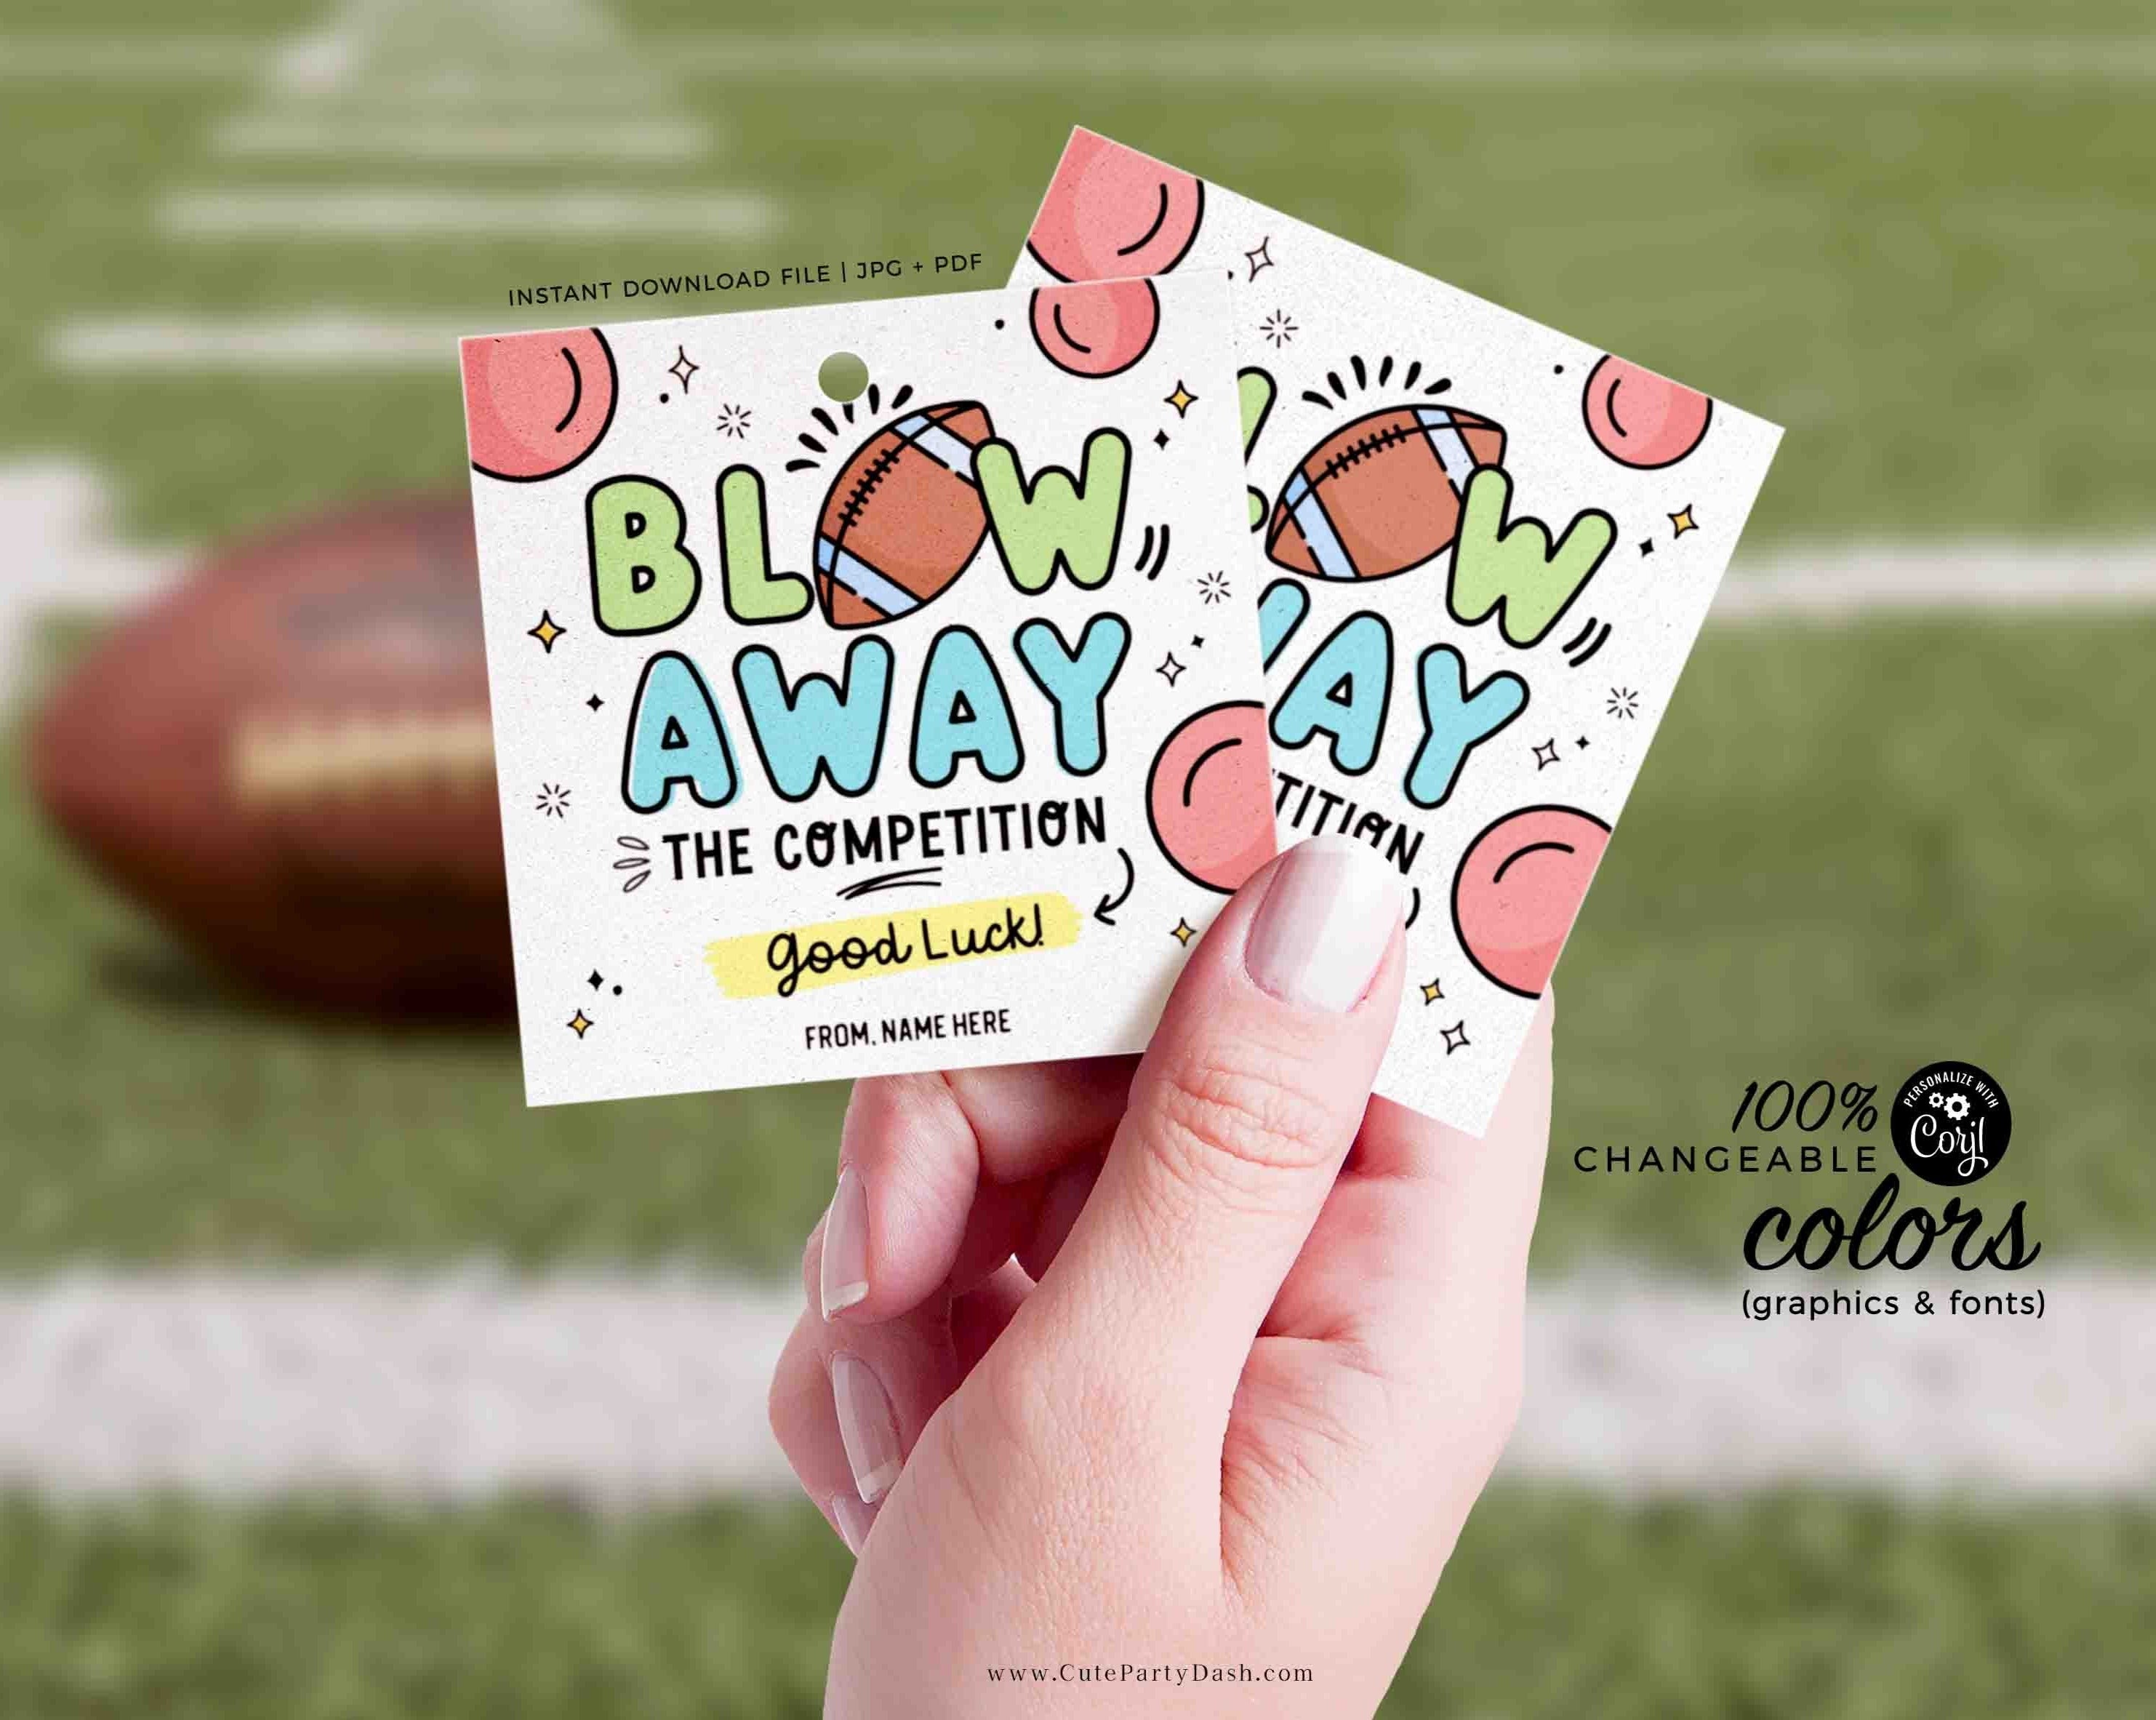 Real Estate Football Game on Printable Pop by Tag Download 